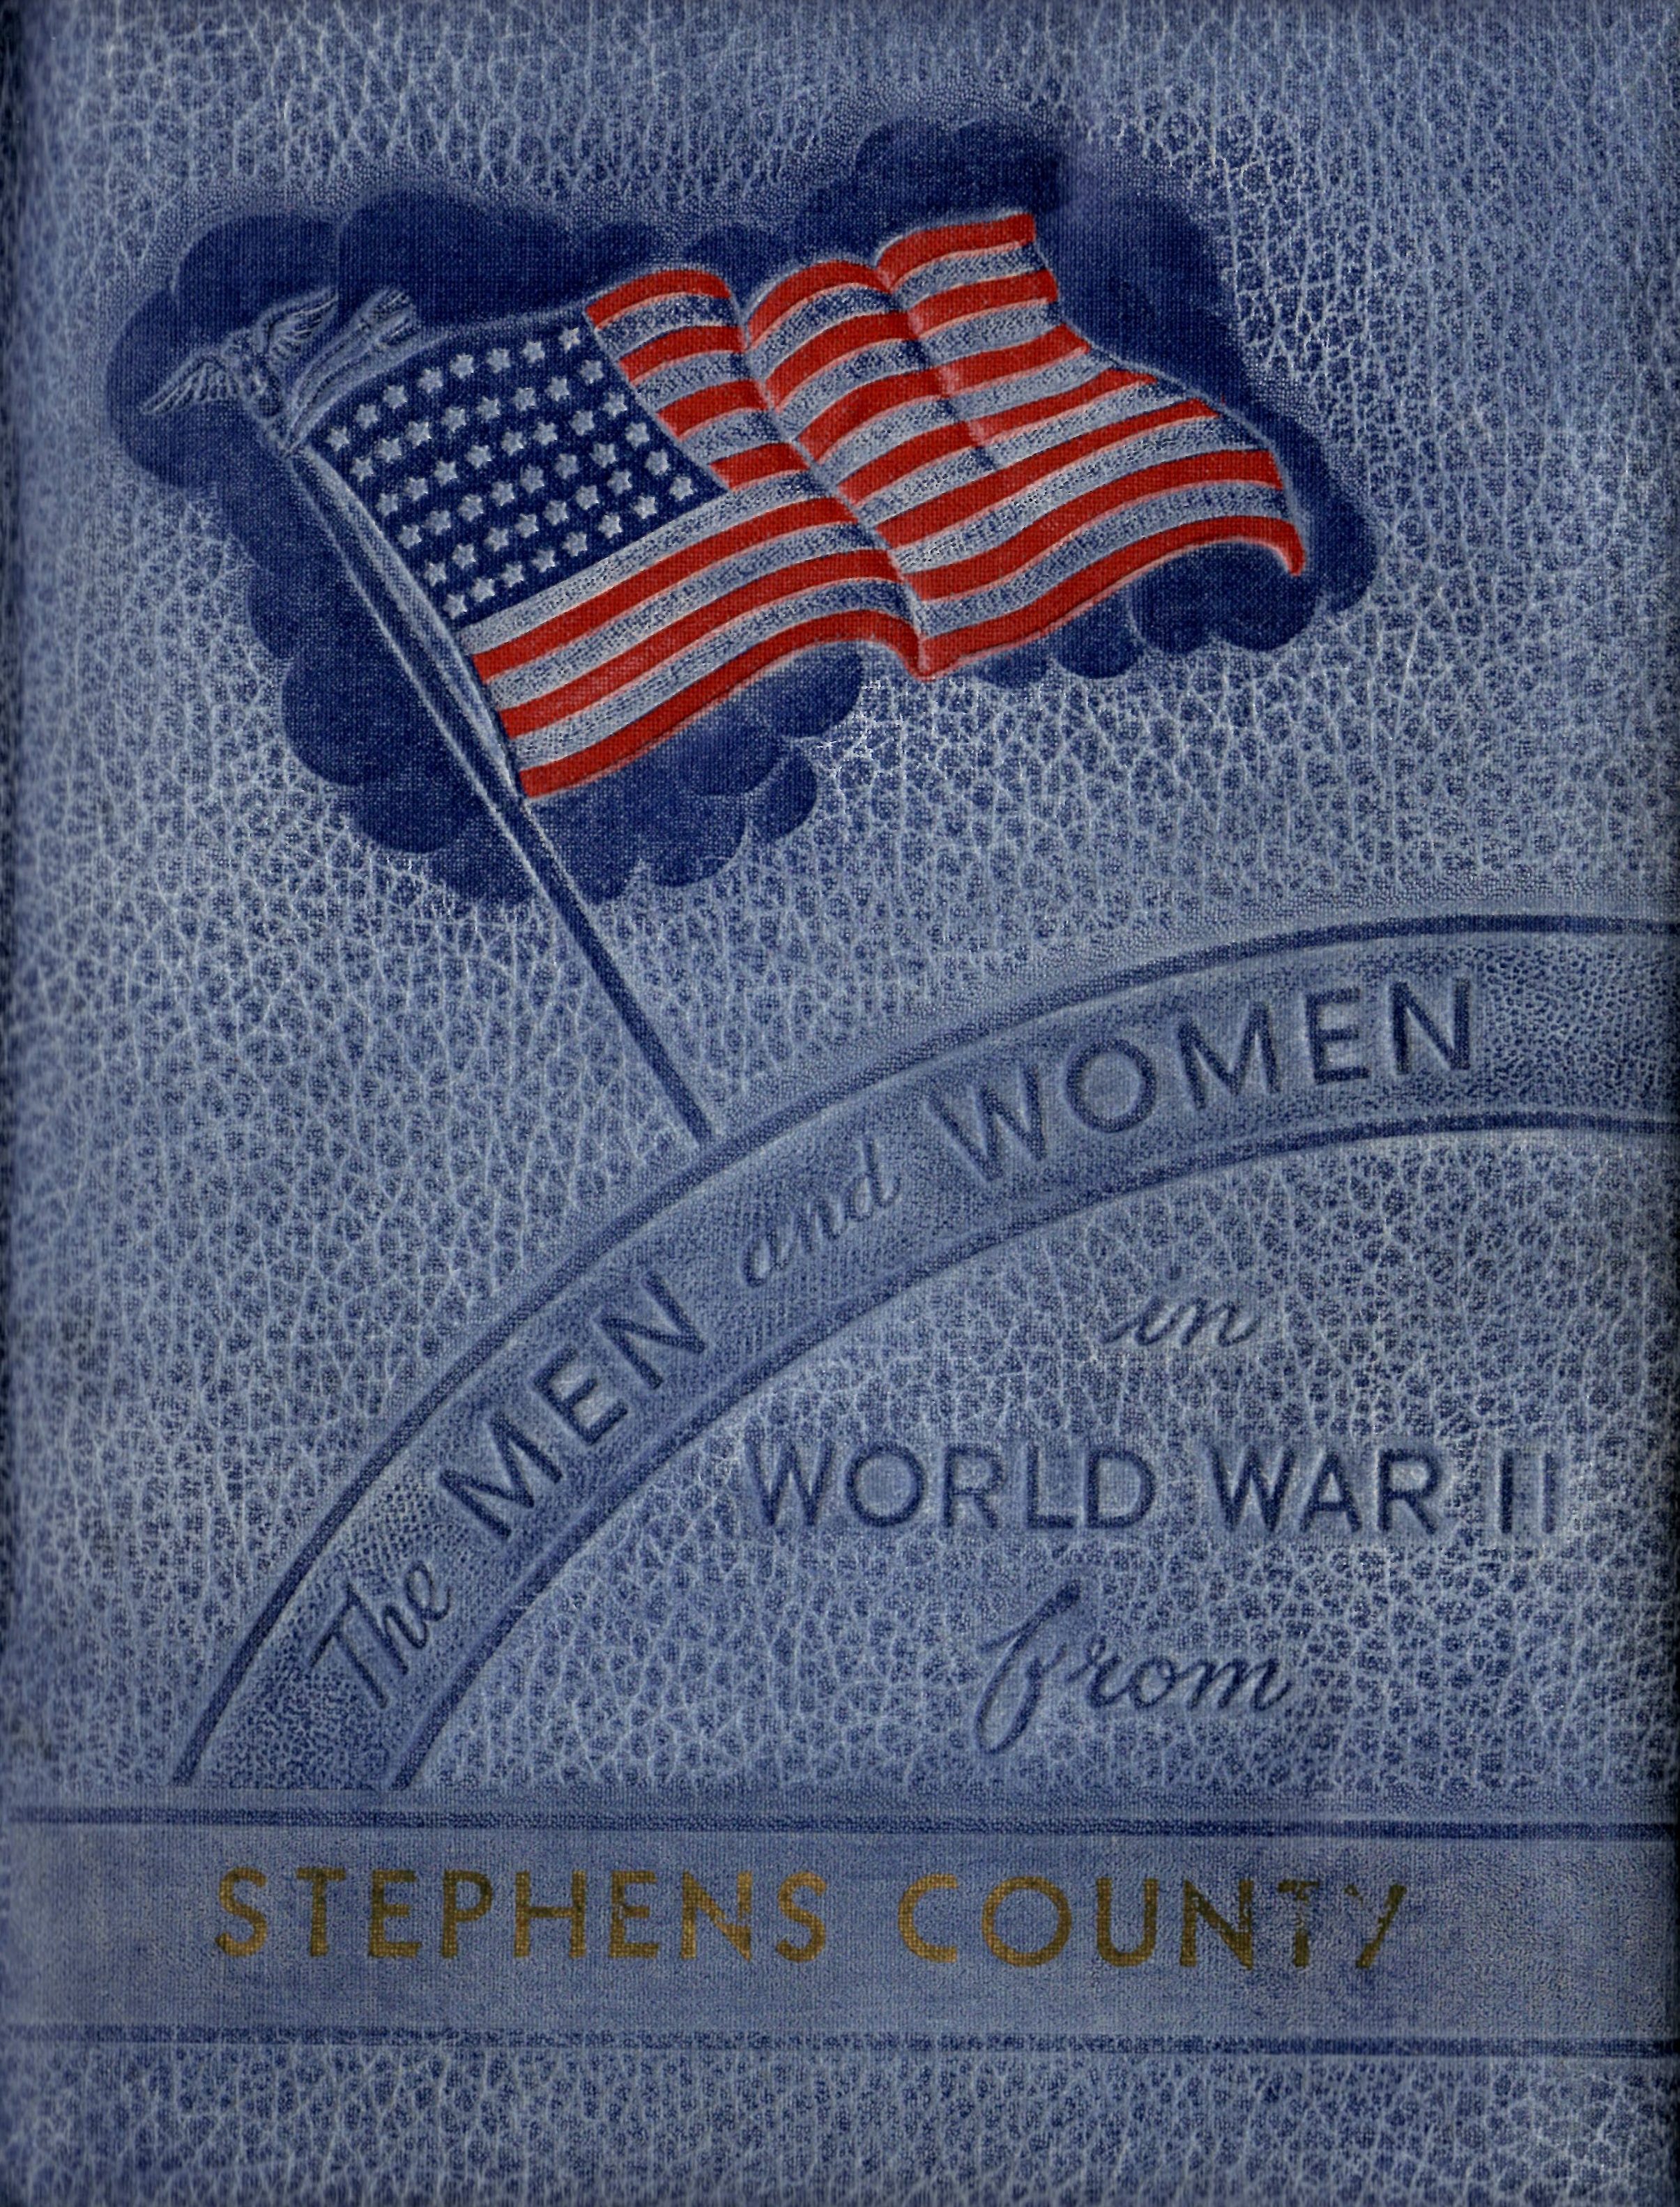 Men and women in the Armed Forces from Stephens County Texas World War Two WW2 WWII 